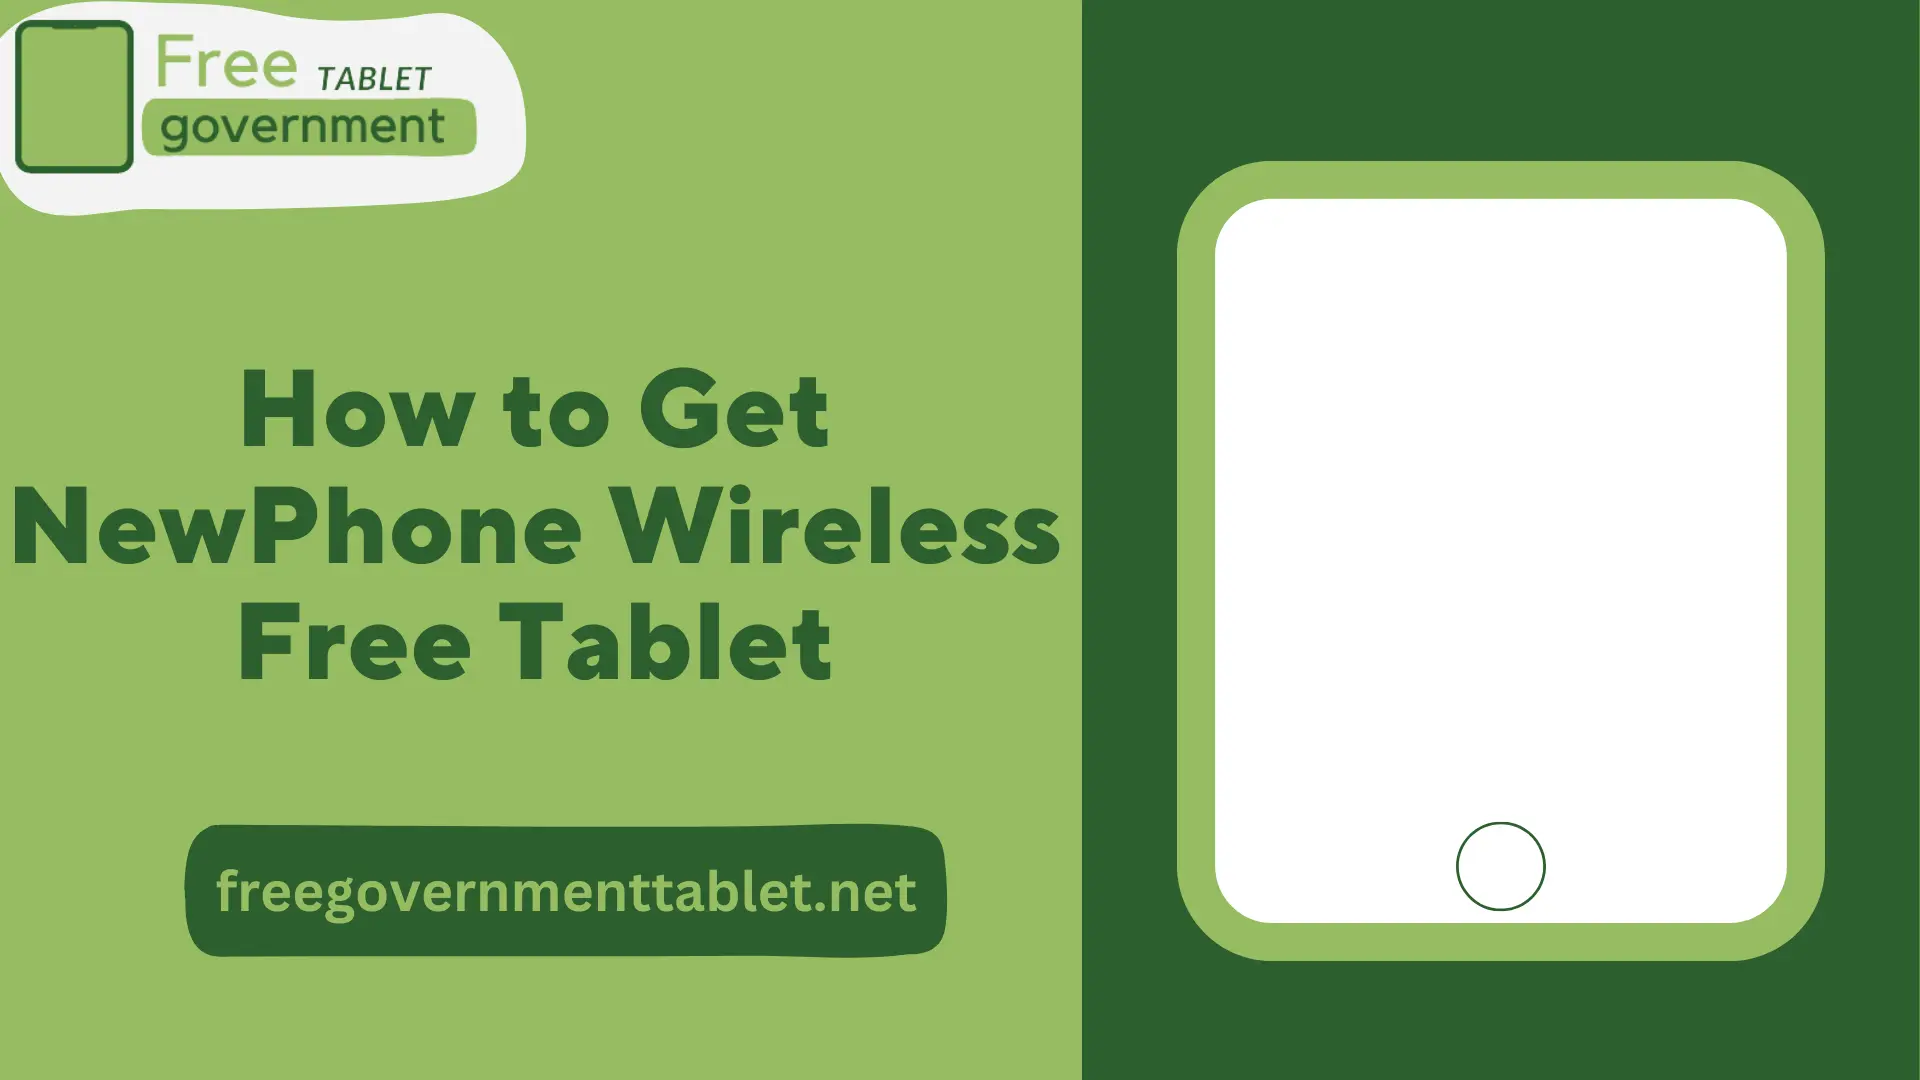 How to Get NewPhone Wireless Free Tablet